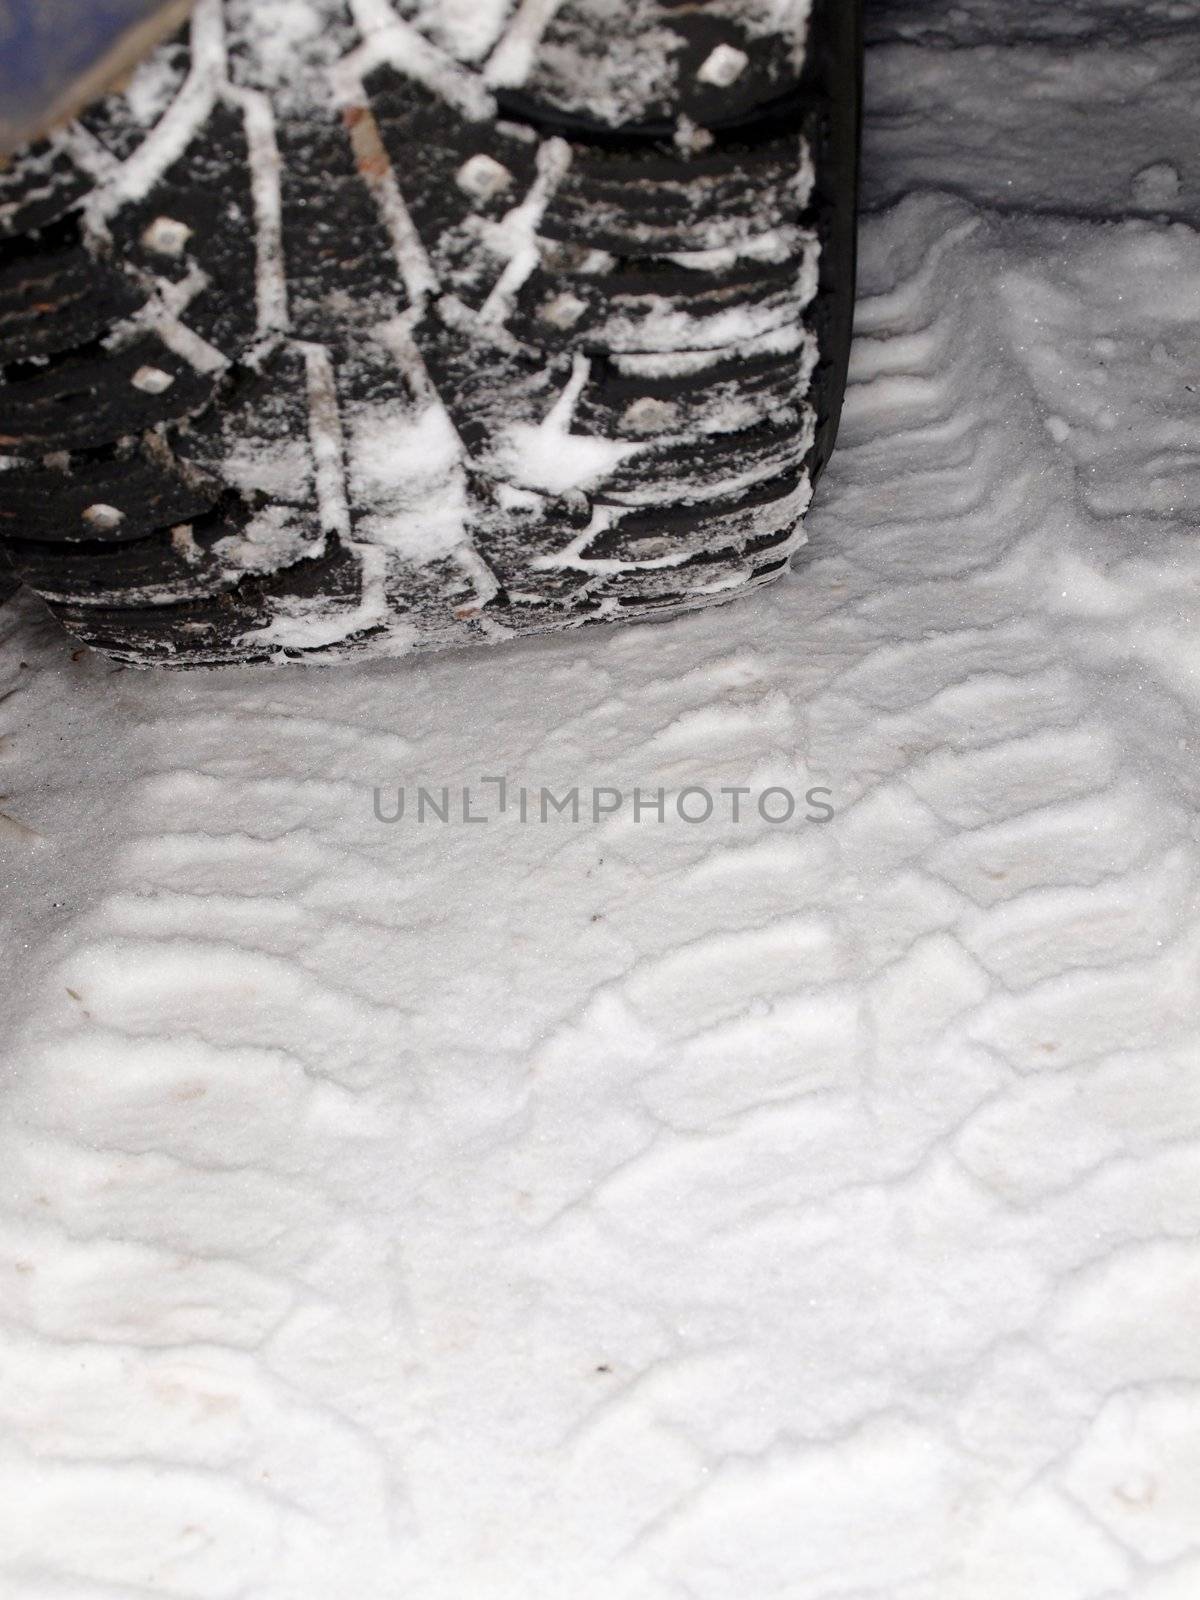 Studded winter tires, isolated on top of snow covered ground